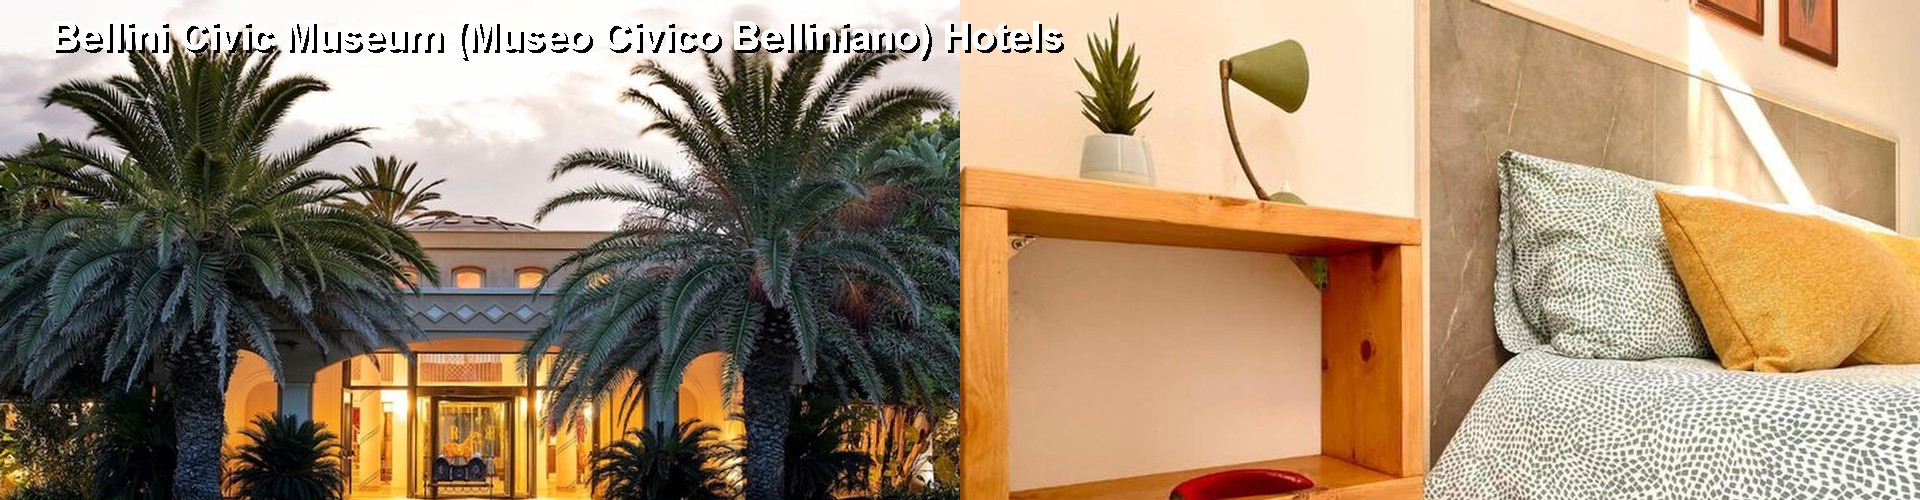 5 Best Hotels near Bellini Civic Museum (Museo Civico Belliniano)